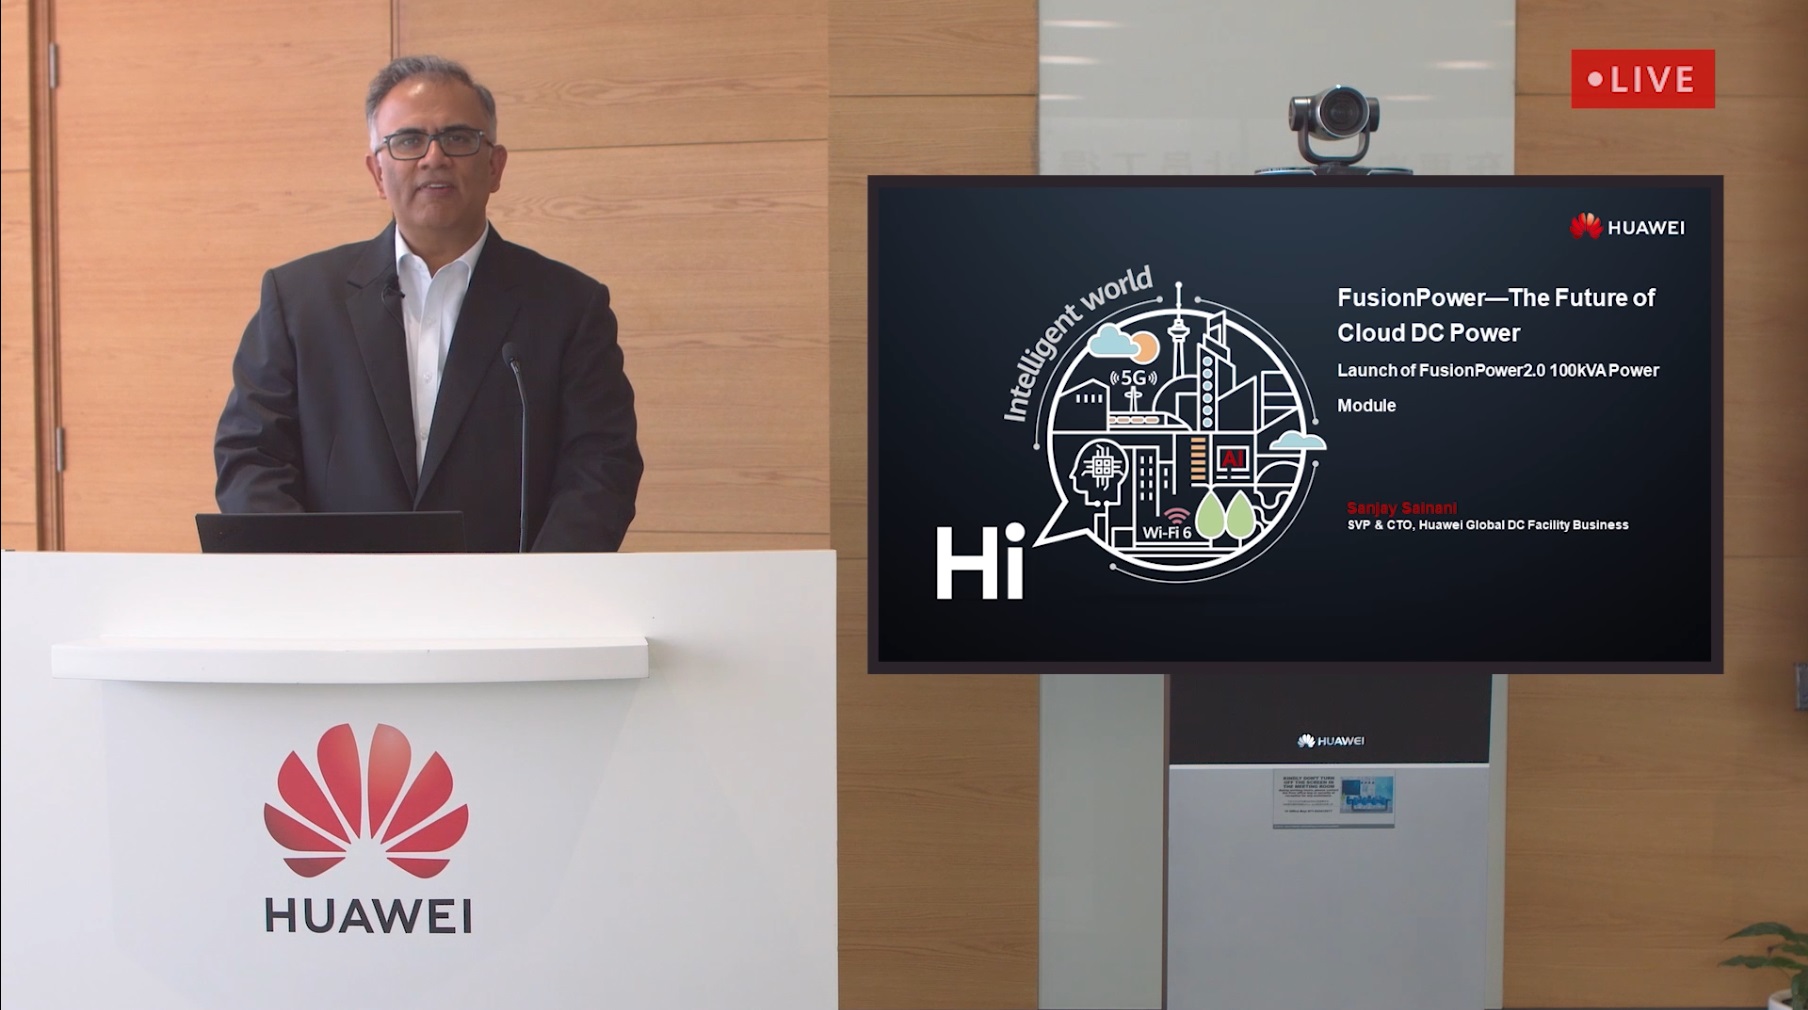 Sanjay Kumar Sainani, CTO, Huawei's Global DC Facility Business, speaks at the Industrial Digital Transformation Conference